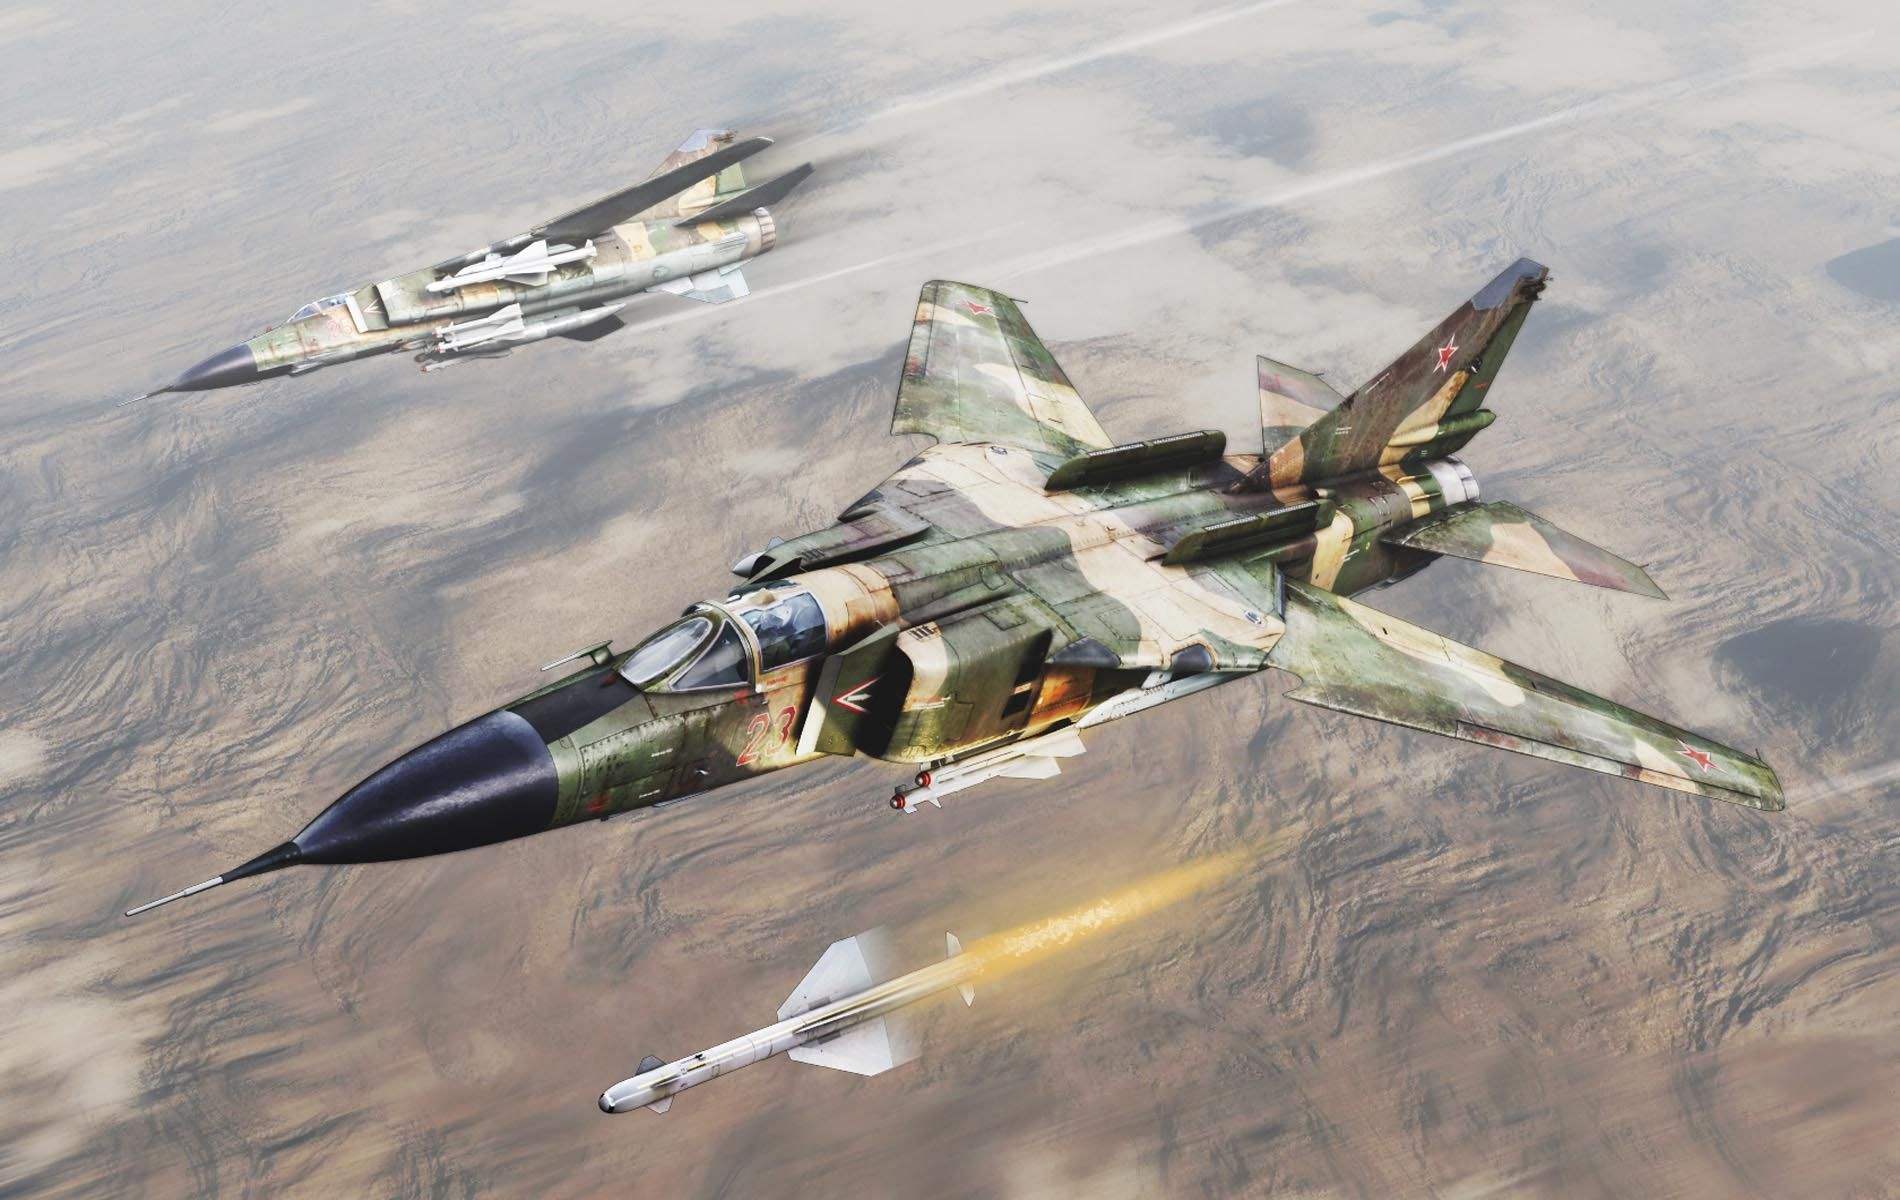 Picture of the MiG-23 attacks